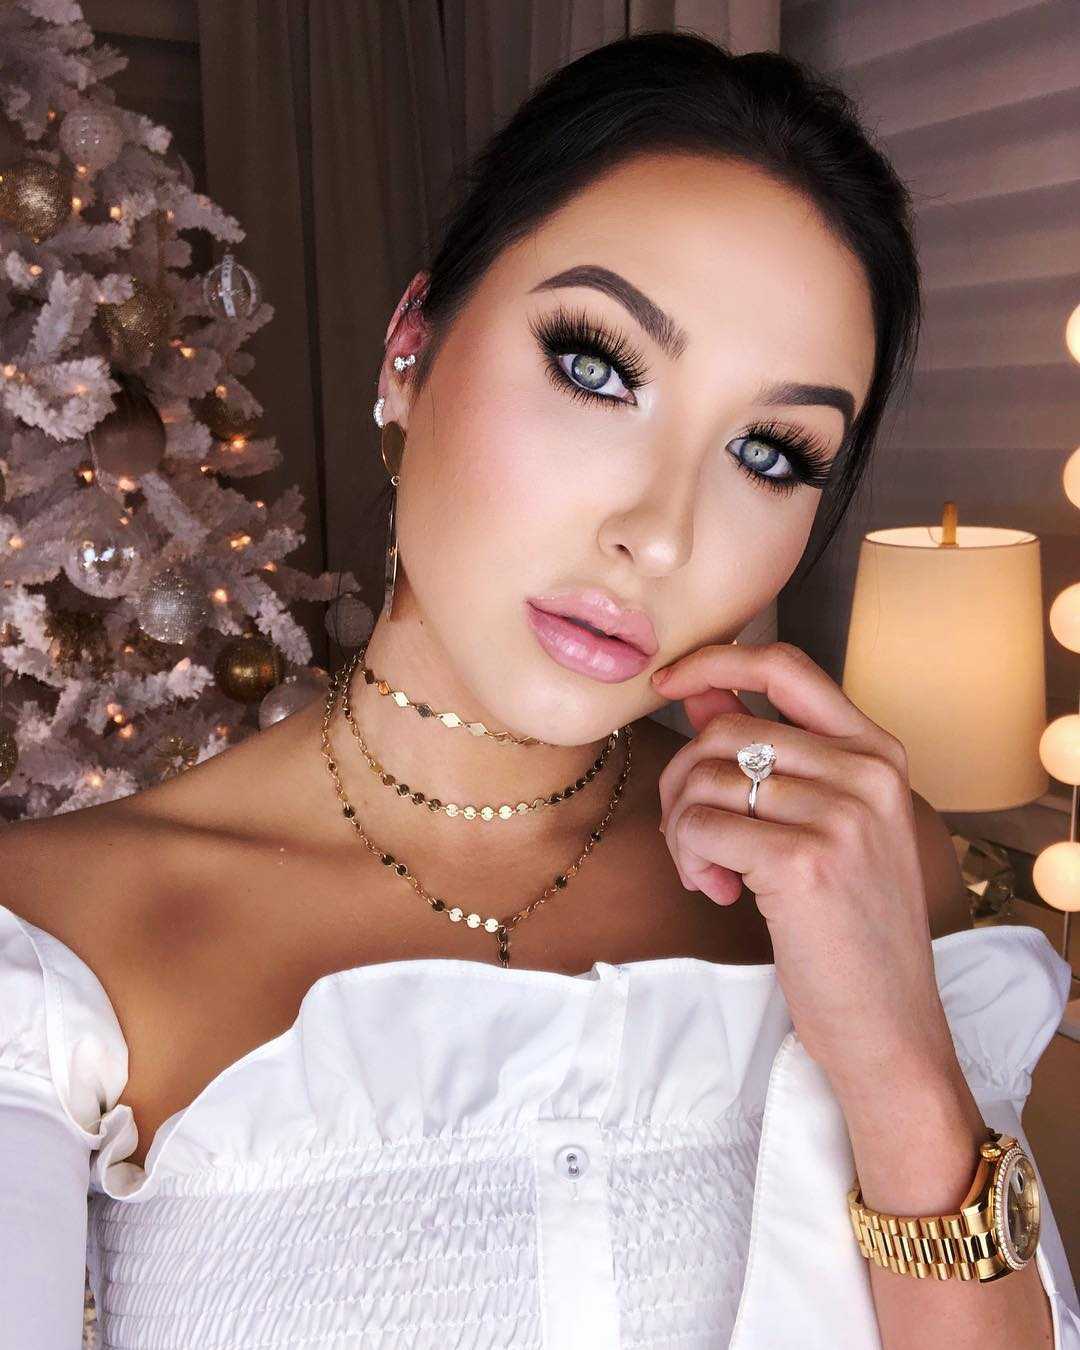 51 Sexy Jaclyn Hill Boobs Pictures Will Induce Passionate Feelings for Her 5